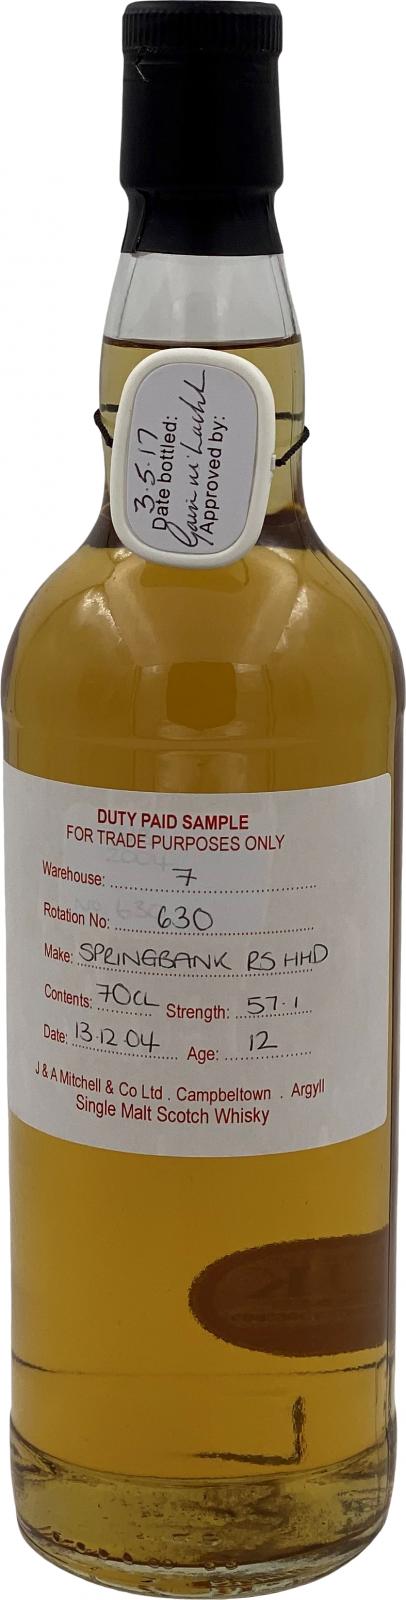 Springbank 2004 Duty Paid Sample For Trade Purposes Only Refill Sherry Hogshead Rotation 630 57.1% 700ml